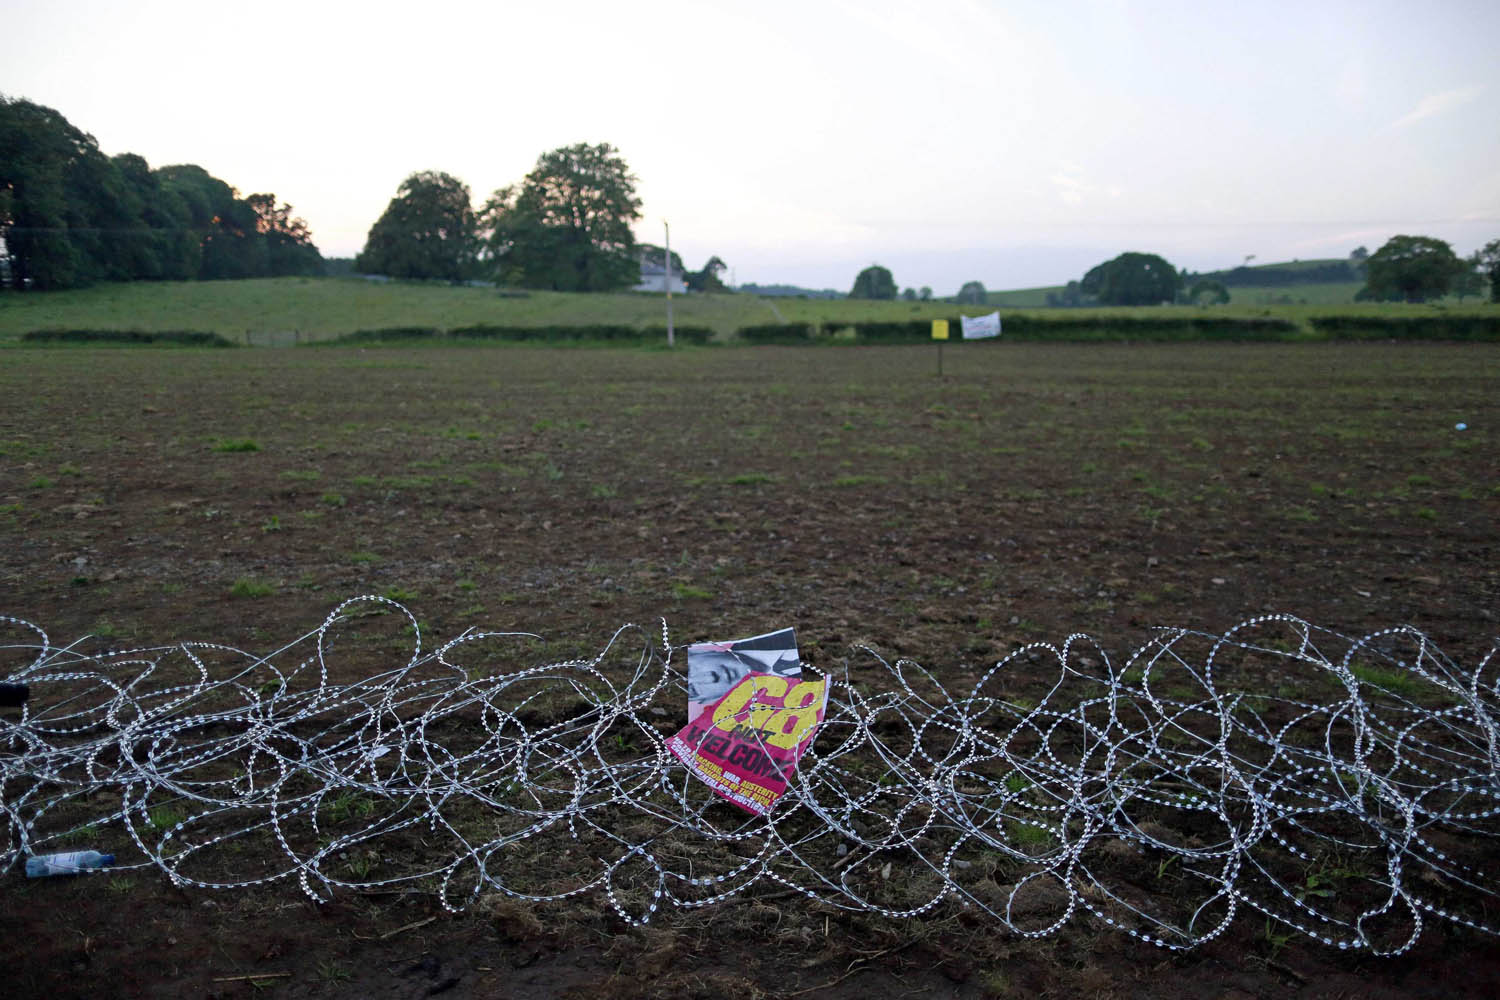 An anti-G8 poster rests in razor wire after protestors broke through the security fence surrounding the G8 Summit in the Lough Erne Golf Resort in County Fermanagh